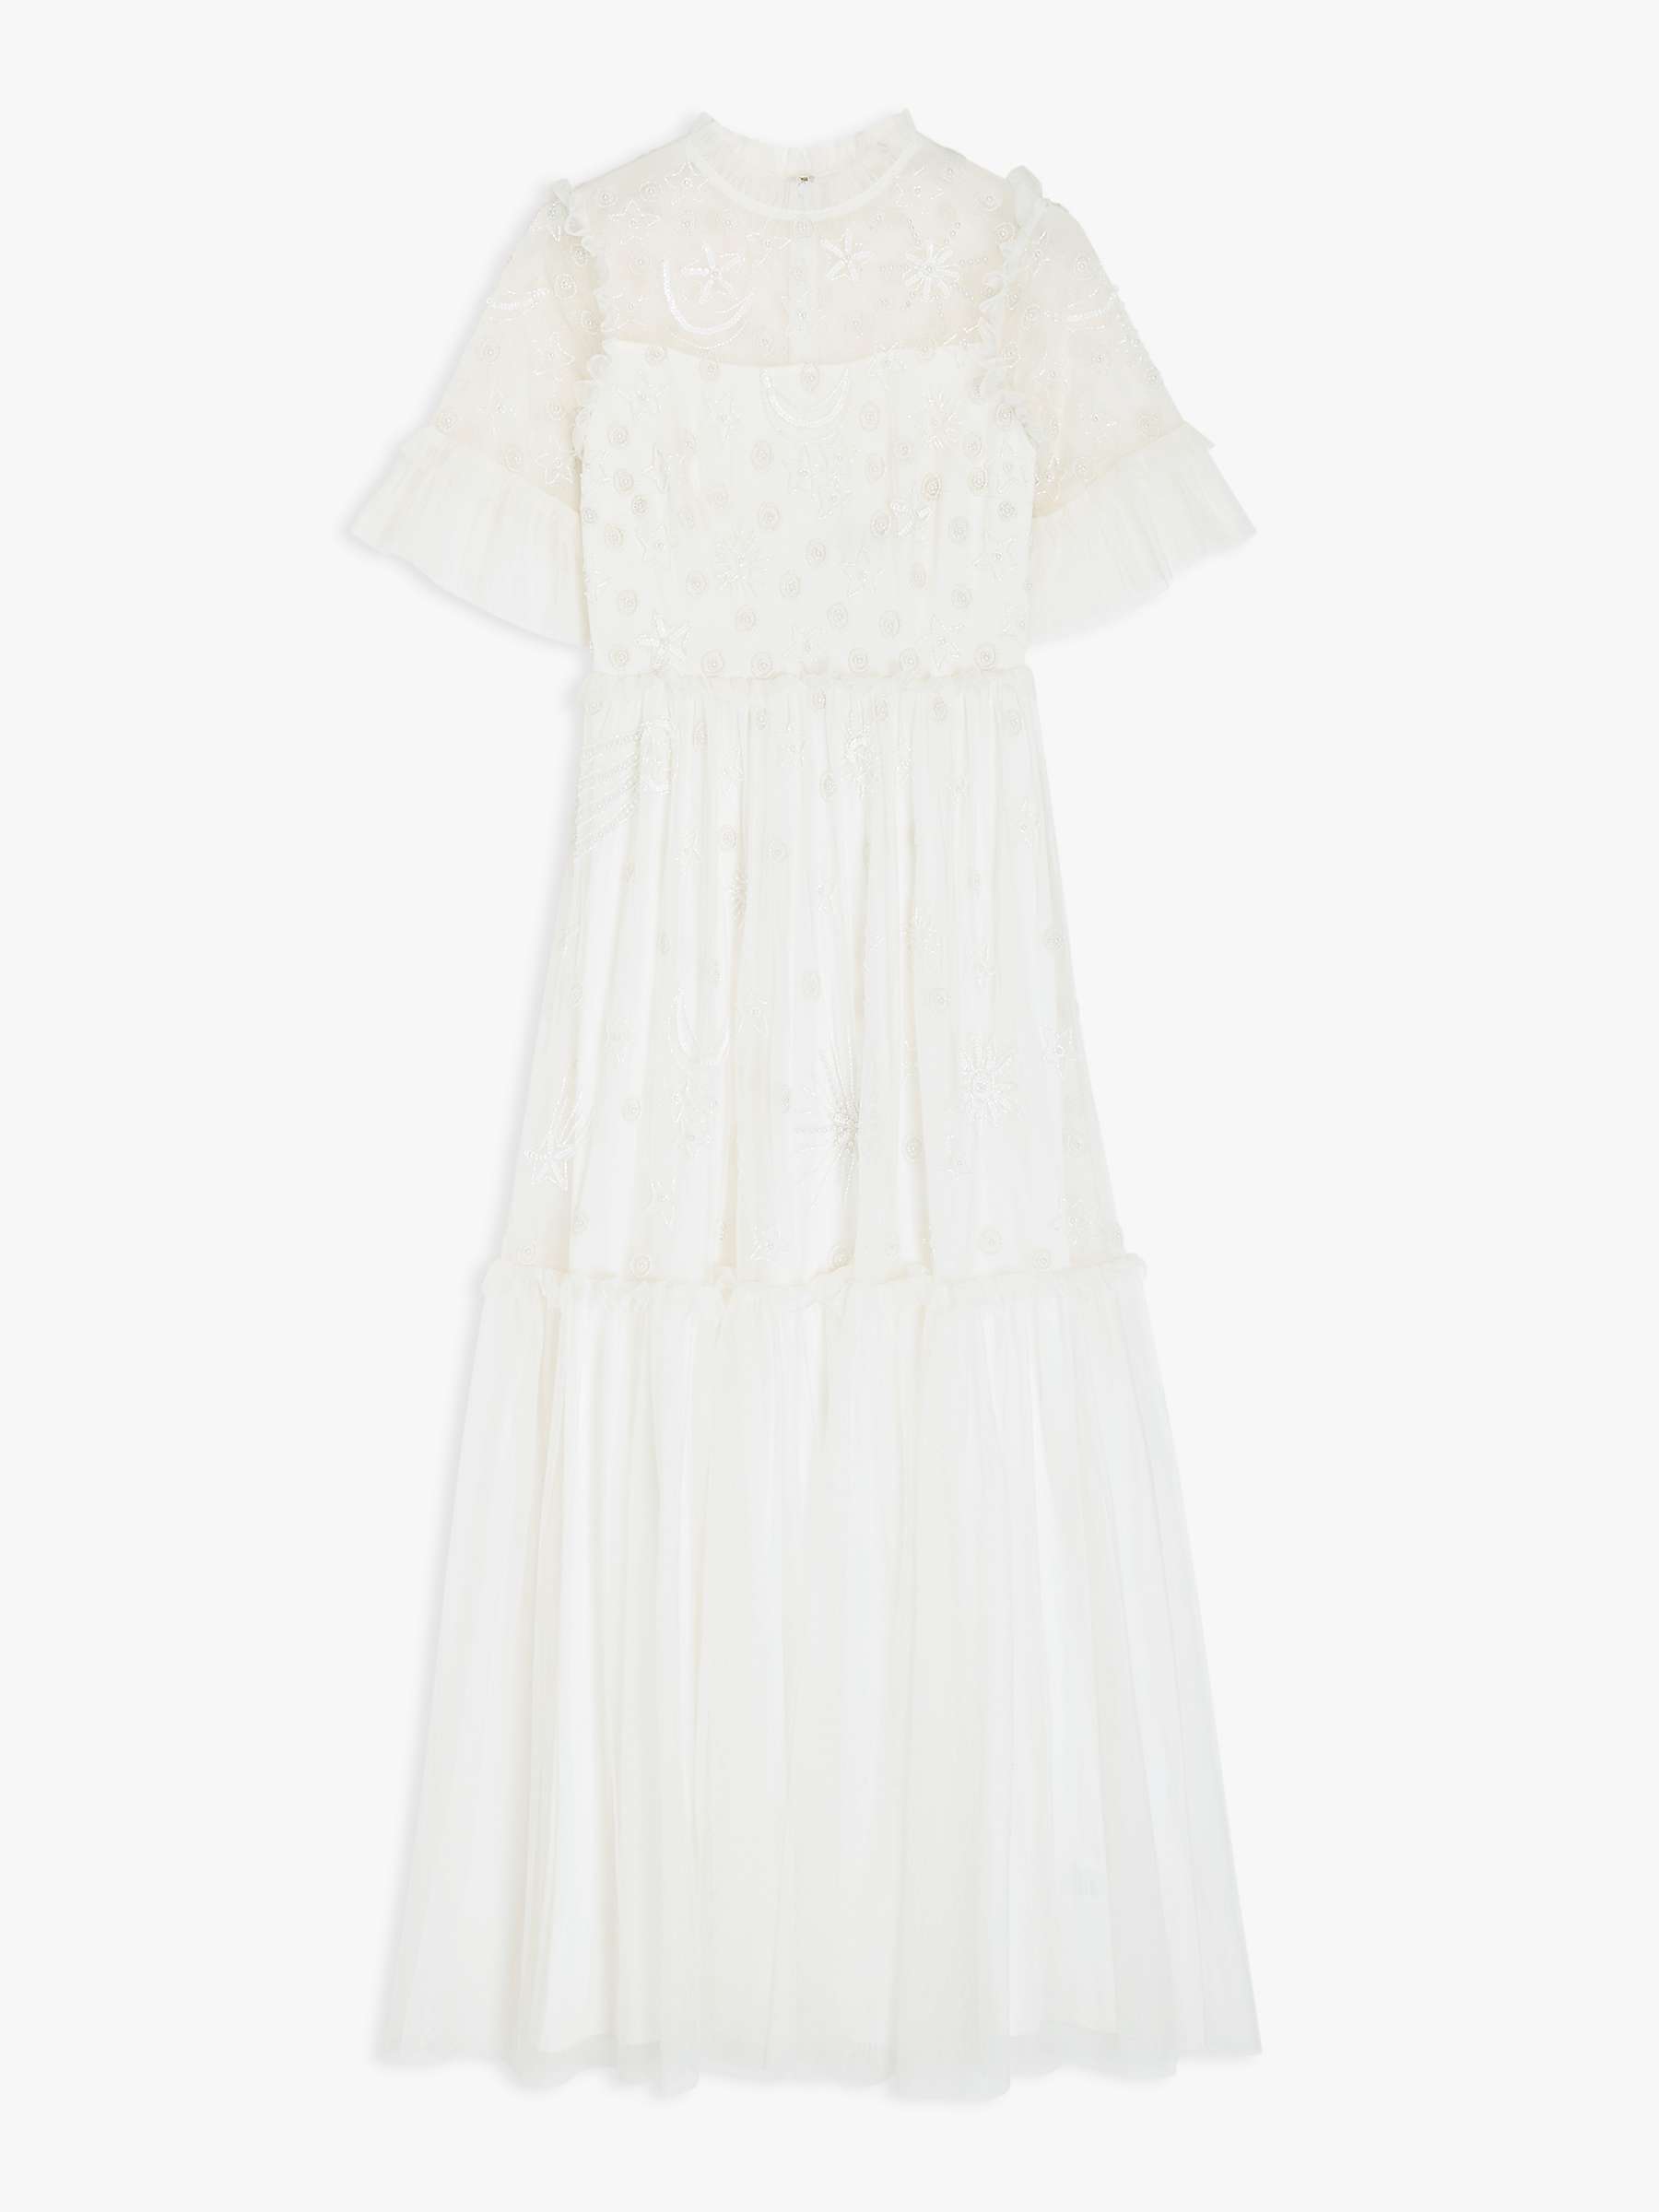 Buy Lace & Beads Maria Embroidered Tiered Maxi Dress, White Online at johnlewis.com